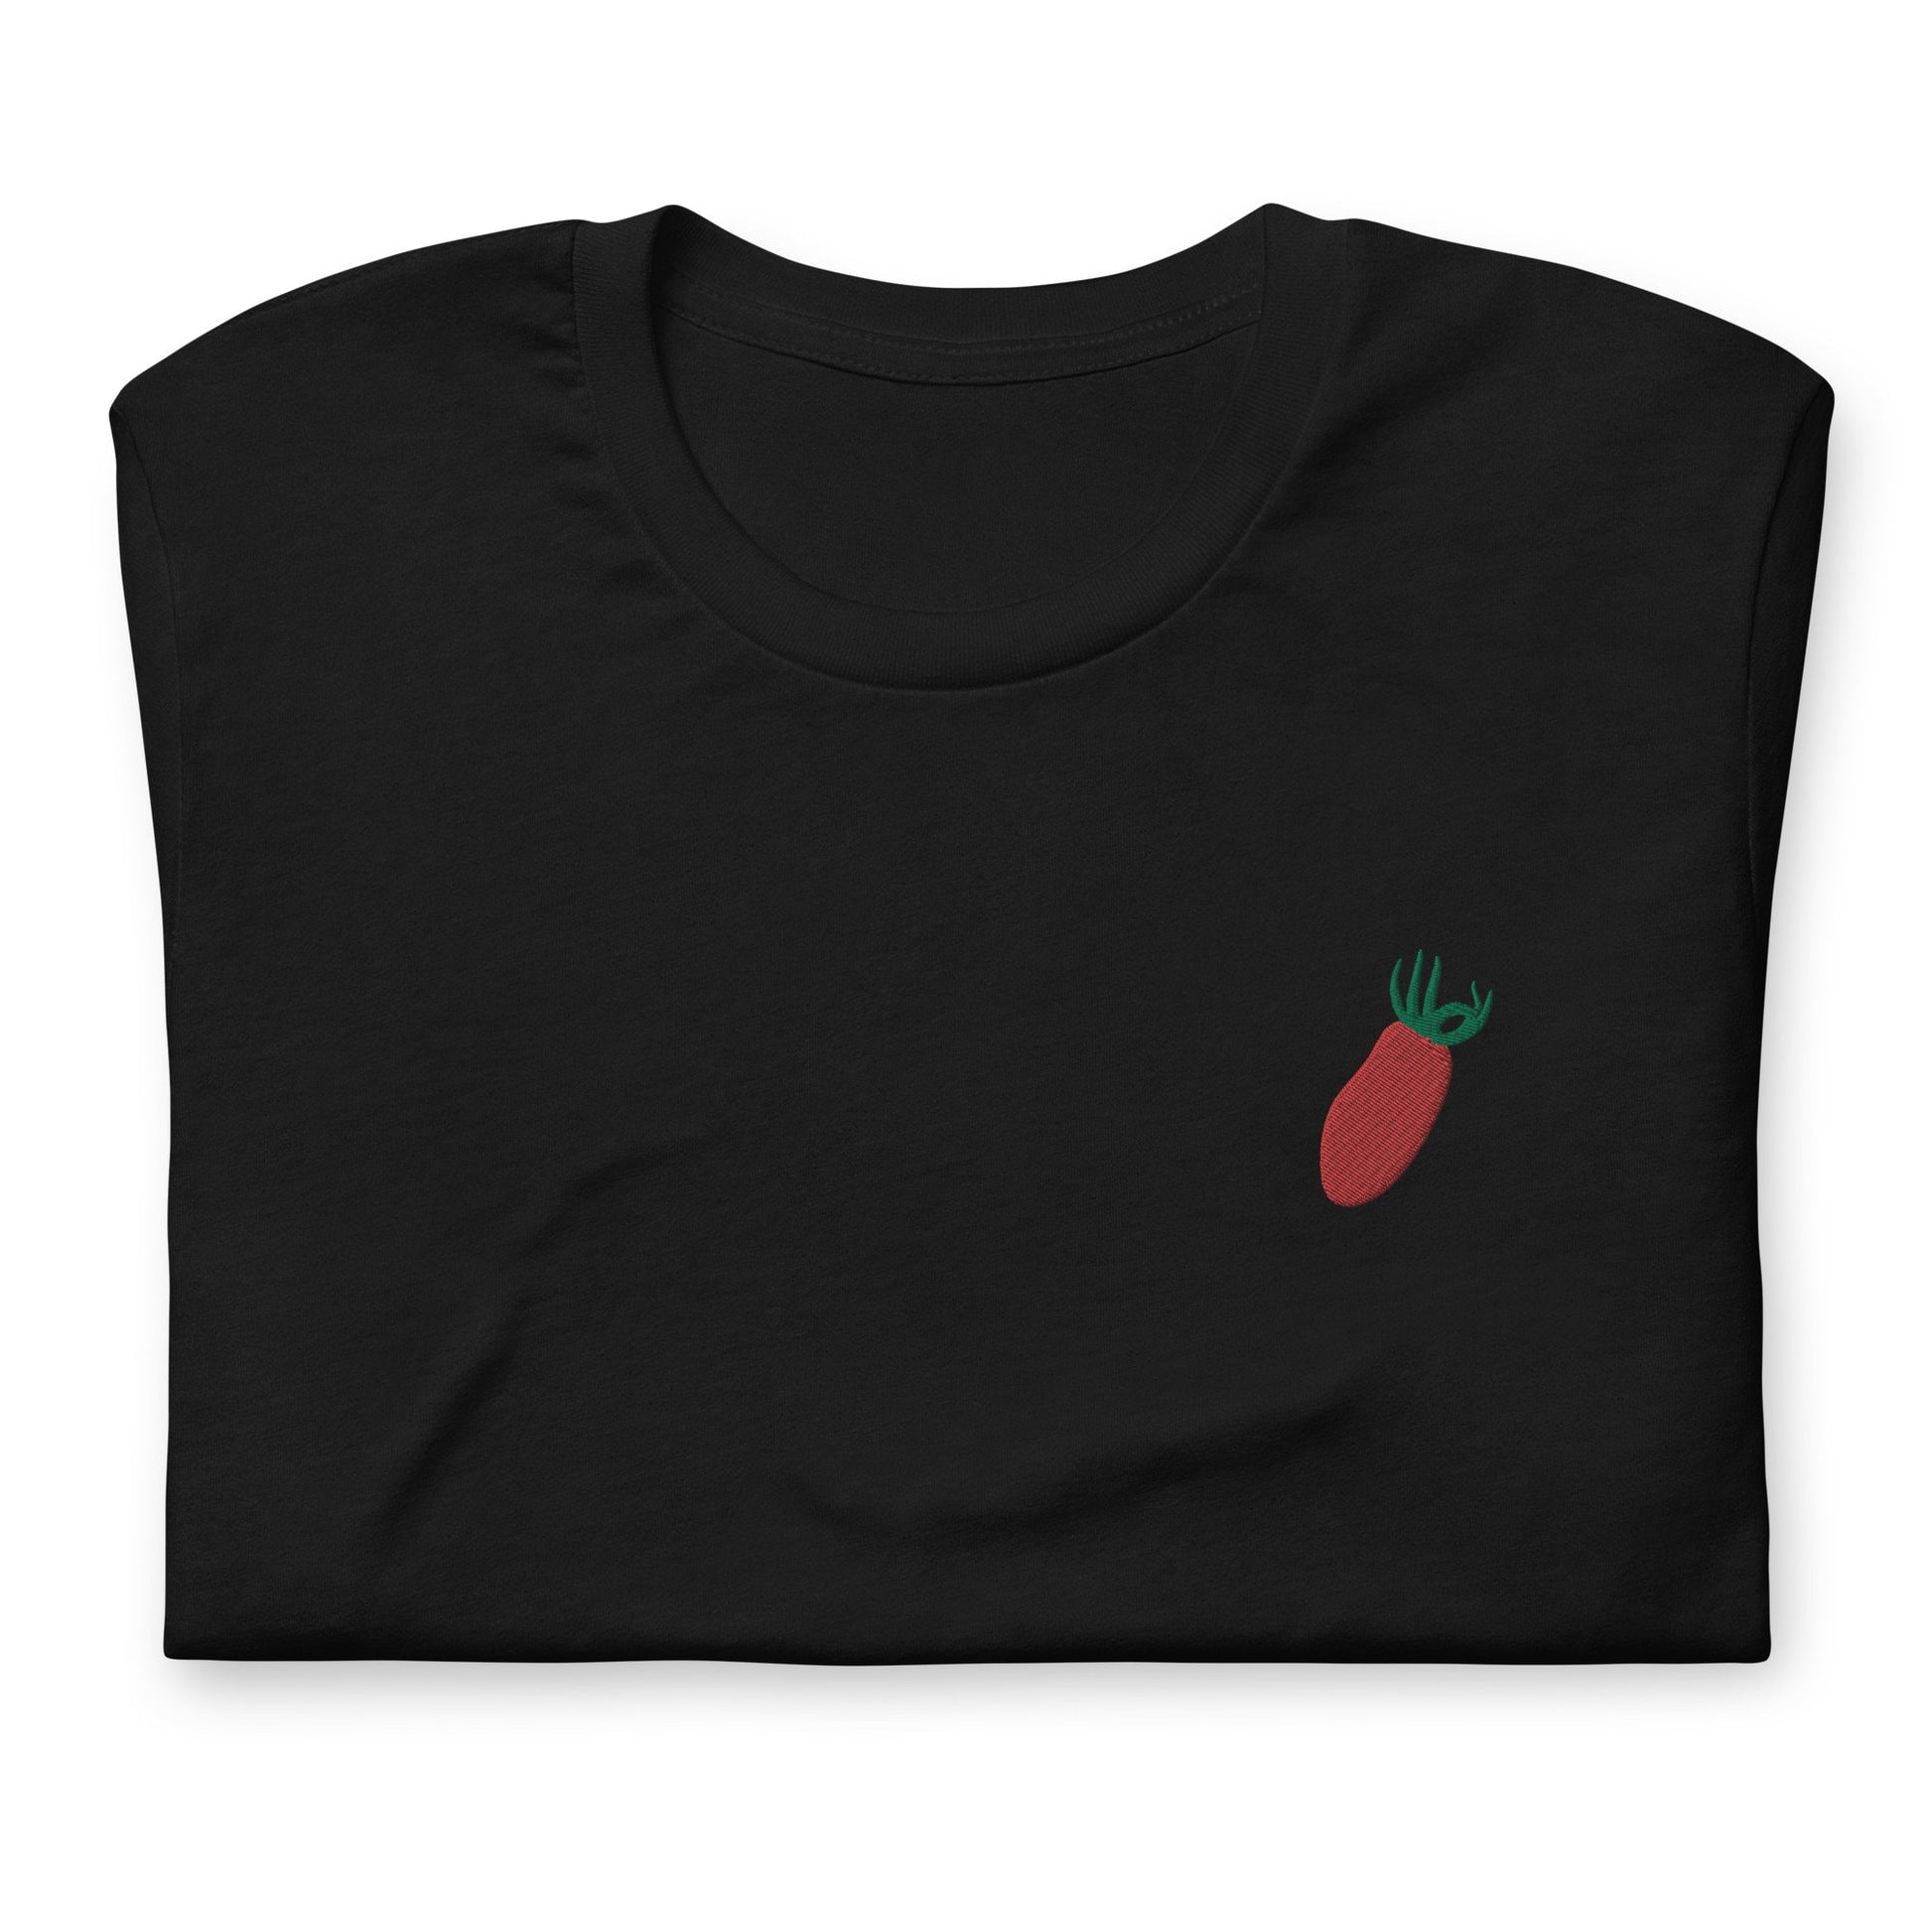 San Marzano Shirt - Italian Food Lovers - Pasta Sauce Makers -Cotton Embroidered Shirt - Multiple Colors